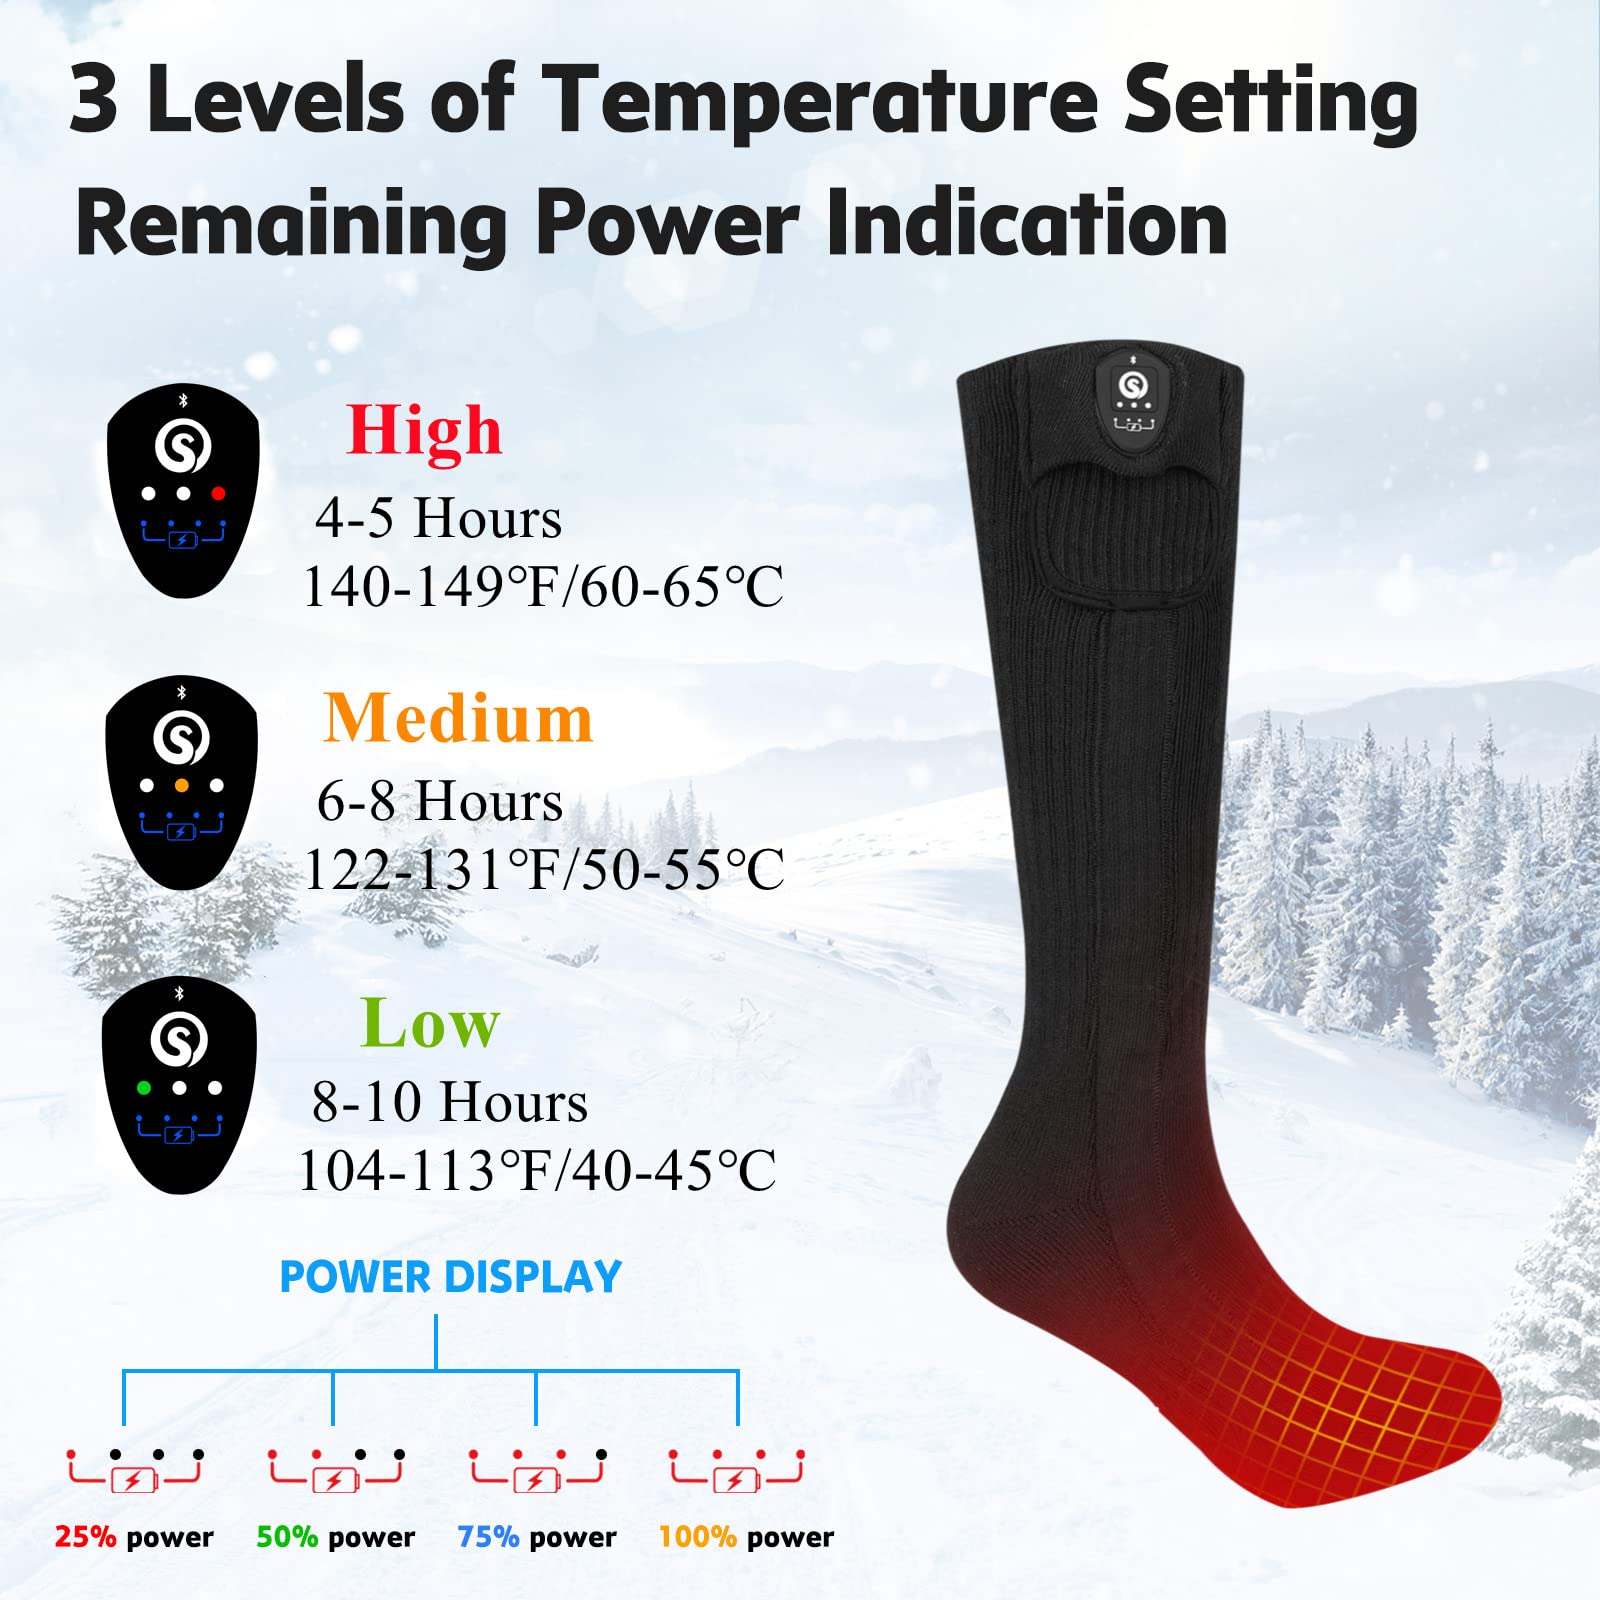 Bluetooth Enabled Mobile Warming Heated Socks